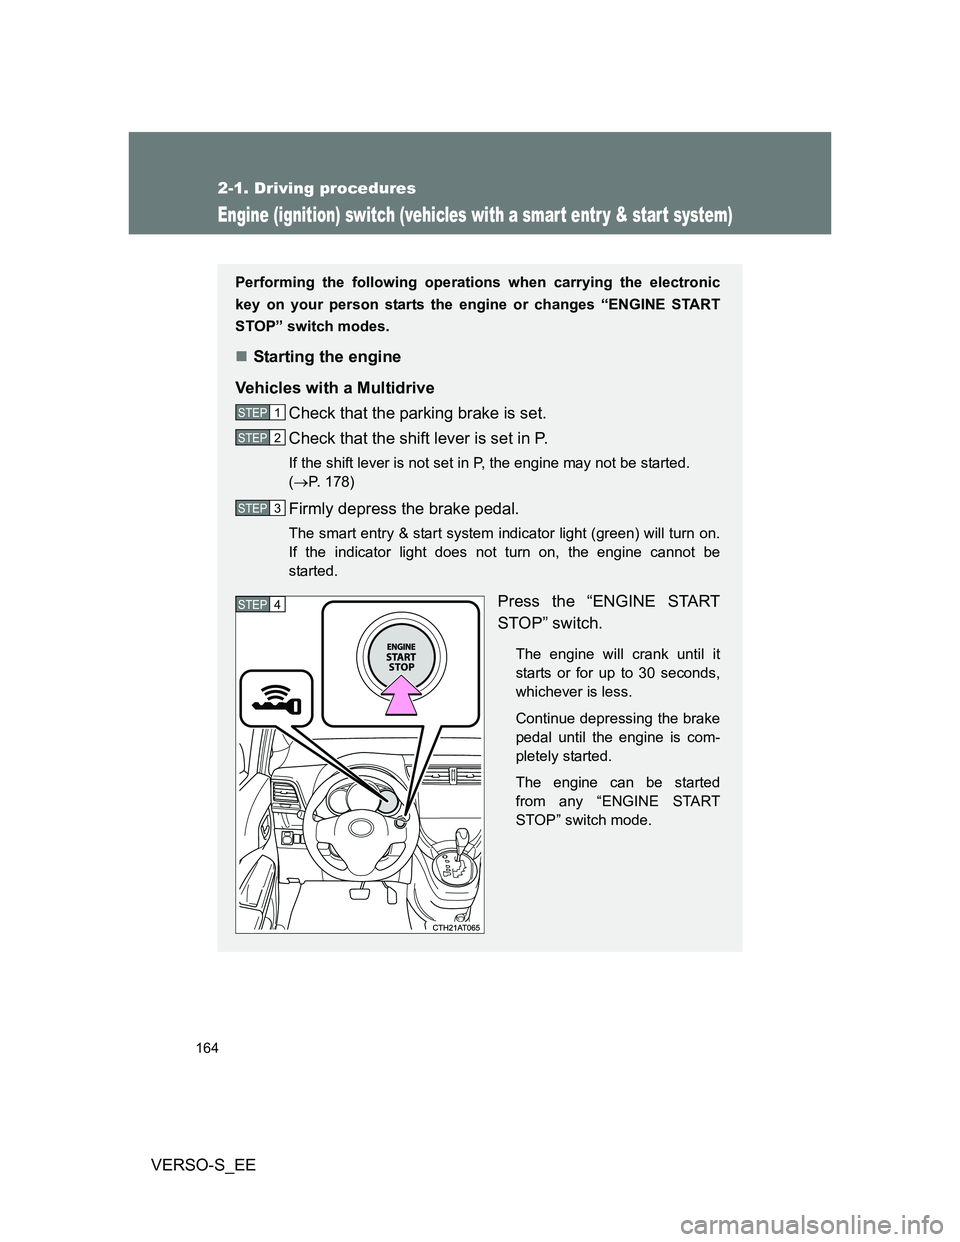 TOYOTA VERSO S 2013  Owners Manual 164
2-1. Driving procedures
VERSO-S_EE
Engine (ignition) switch (vehicles with a smar t entr y & star t system)
Performing the following operations when carrying the electronic
key on your person star